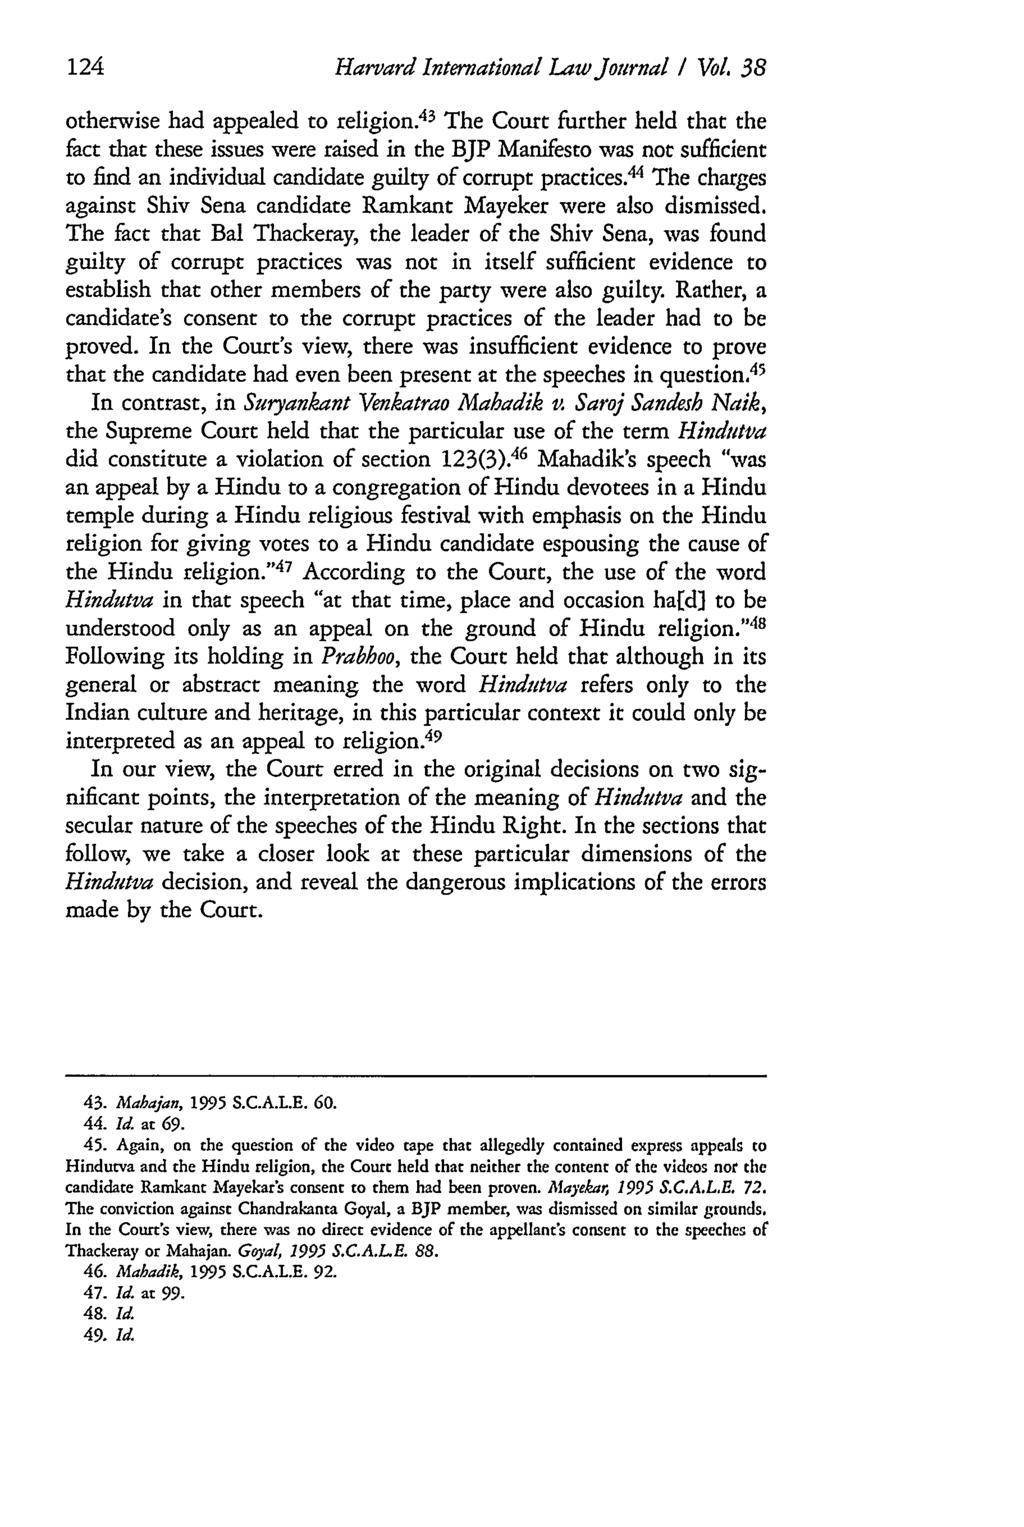 Harvard International Law Journal / Vol 38 otherwise had appealed to religion.